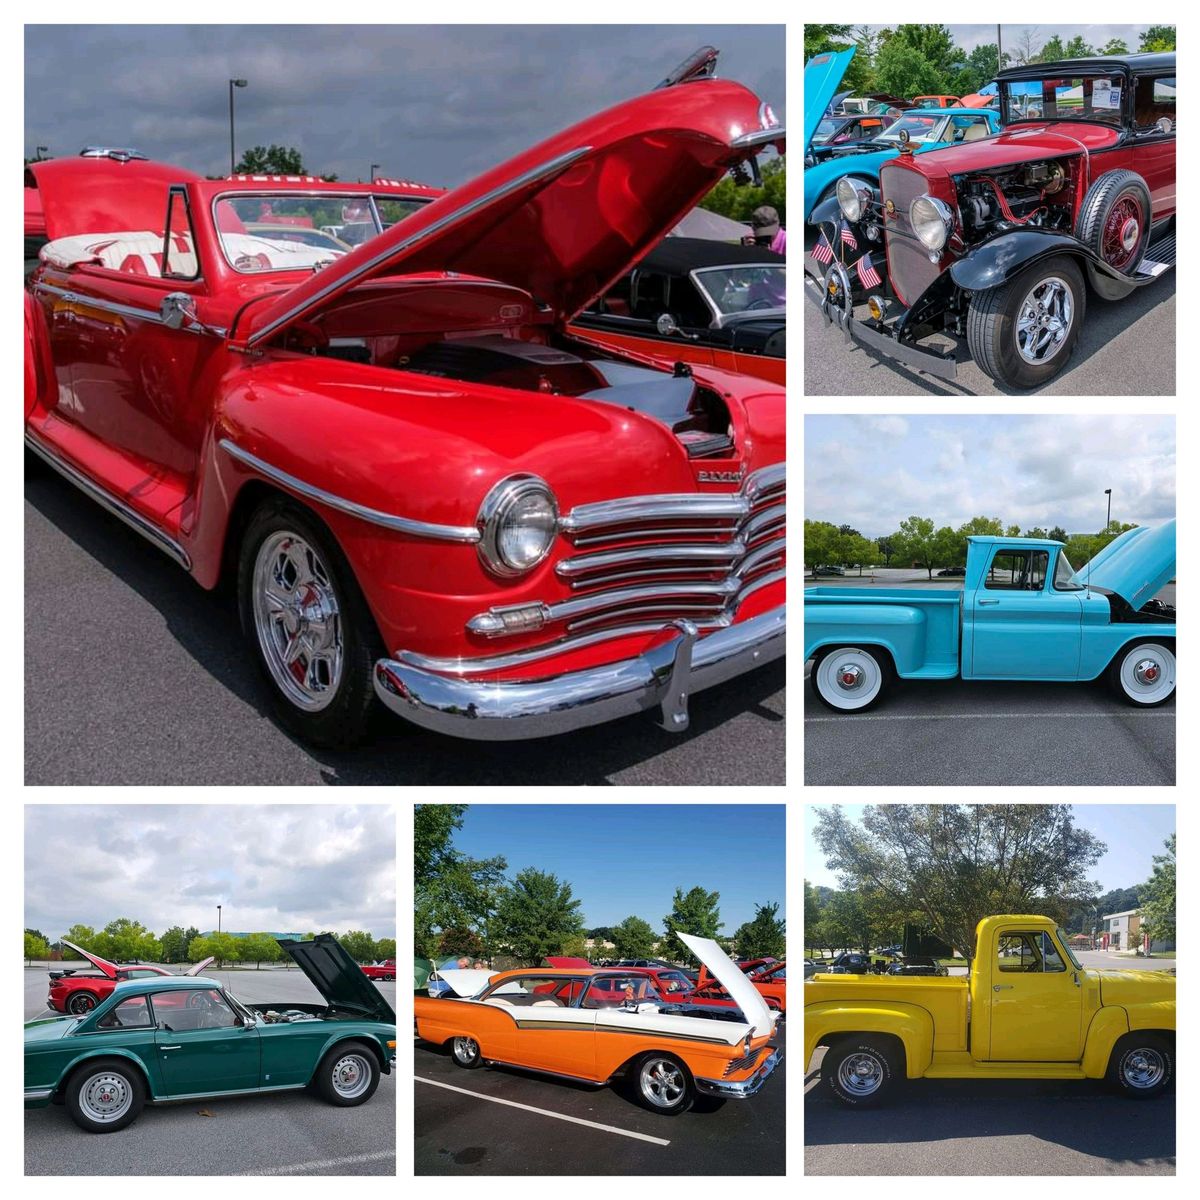 3rd Annual Meals on Wheels Cruise In Car Show